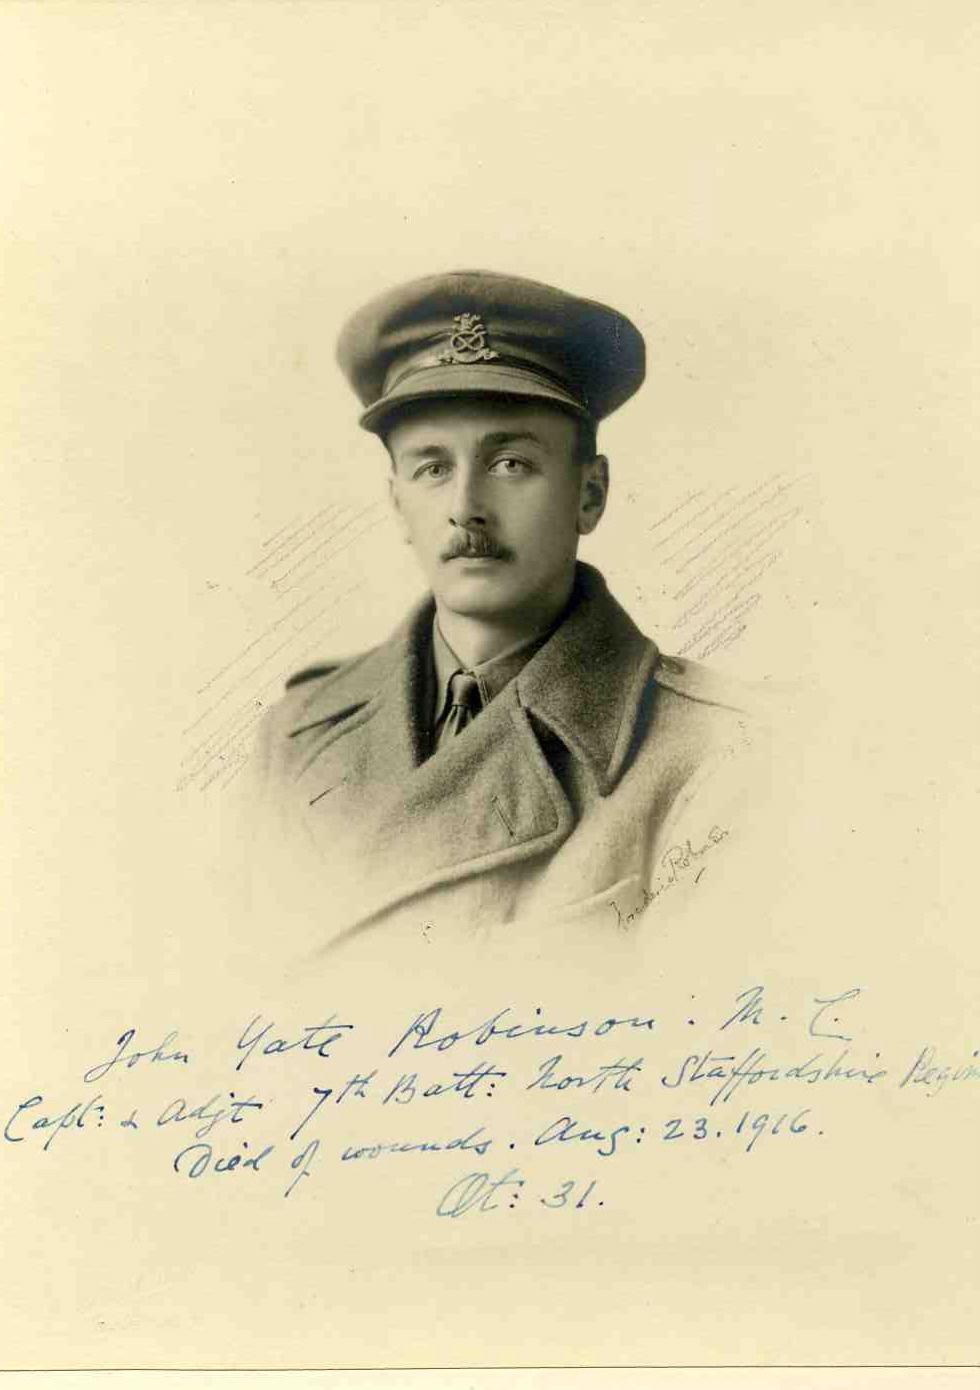 Captain John Yate Robinson, who died of his wounds in the First World War at the age of 31